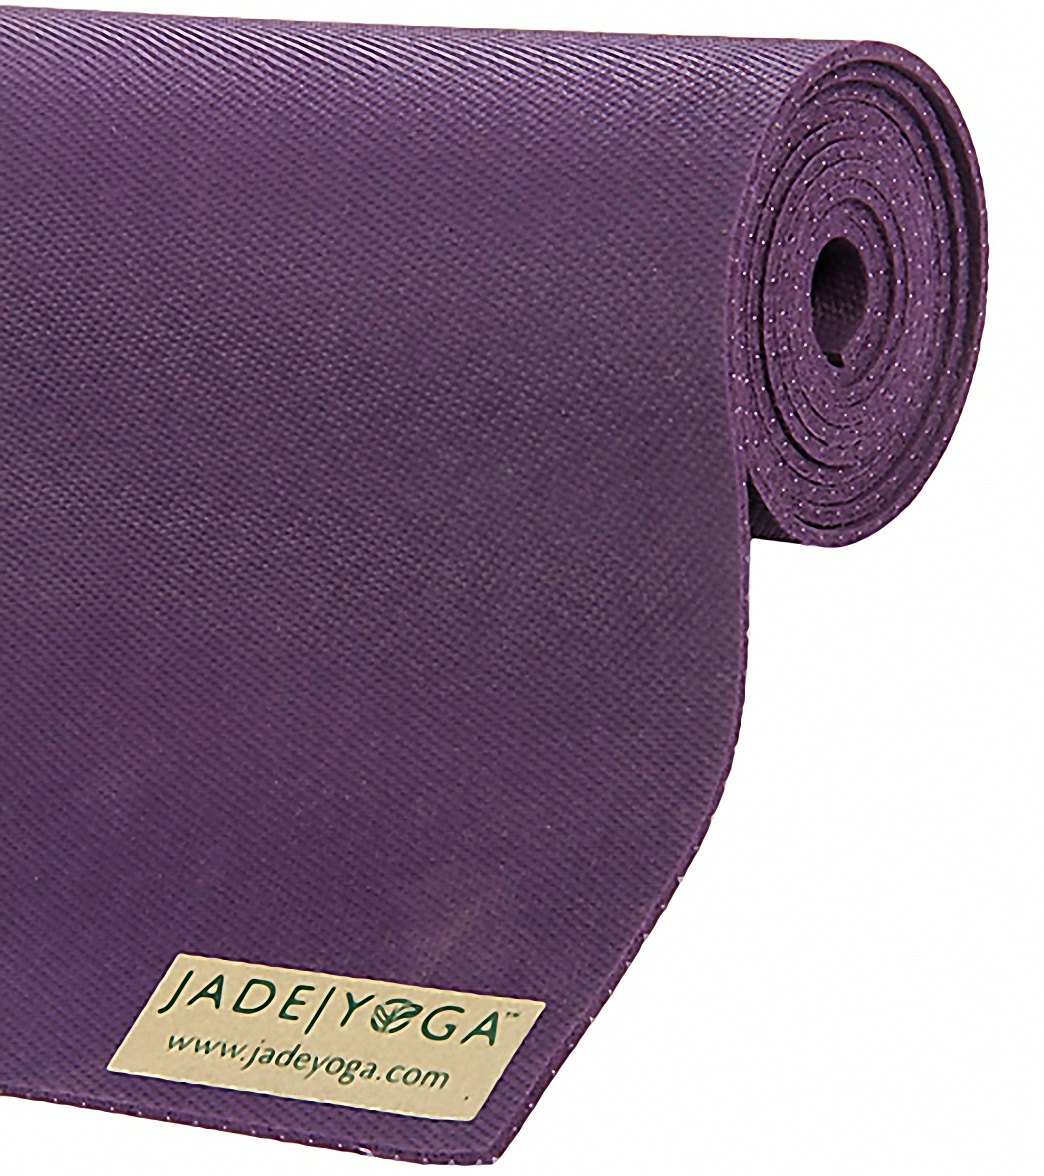 Jade Yoga Fusion Natural Rubber Yoga Mat 68 8mm Extra Thick Purple